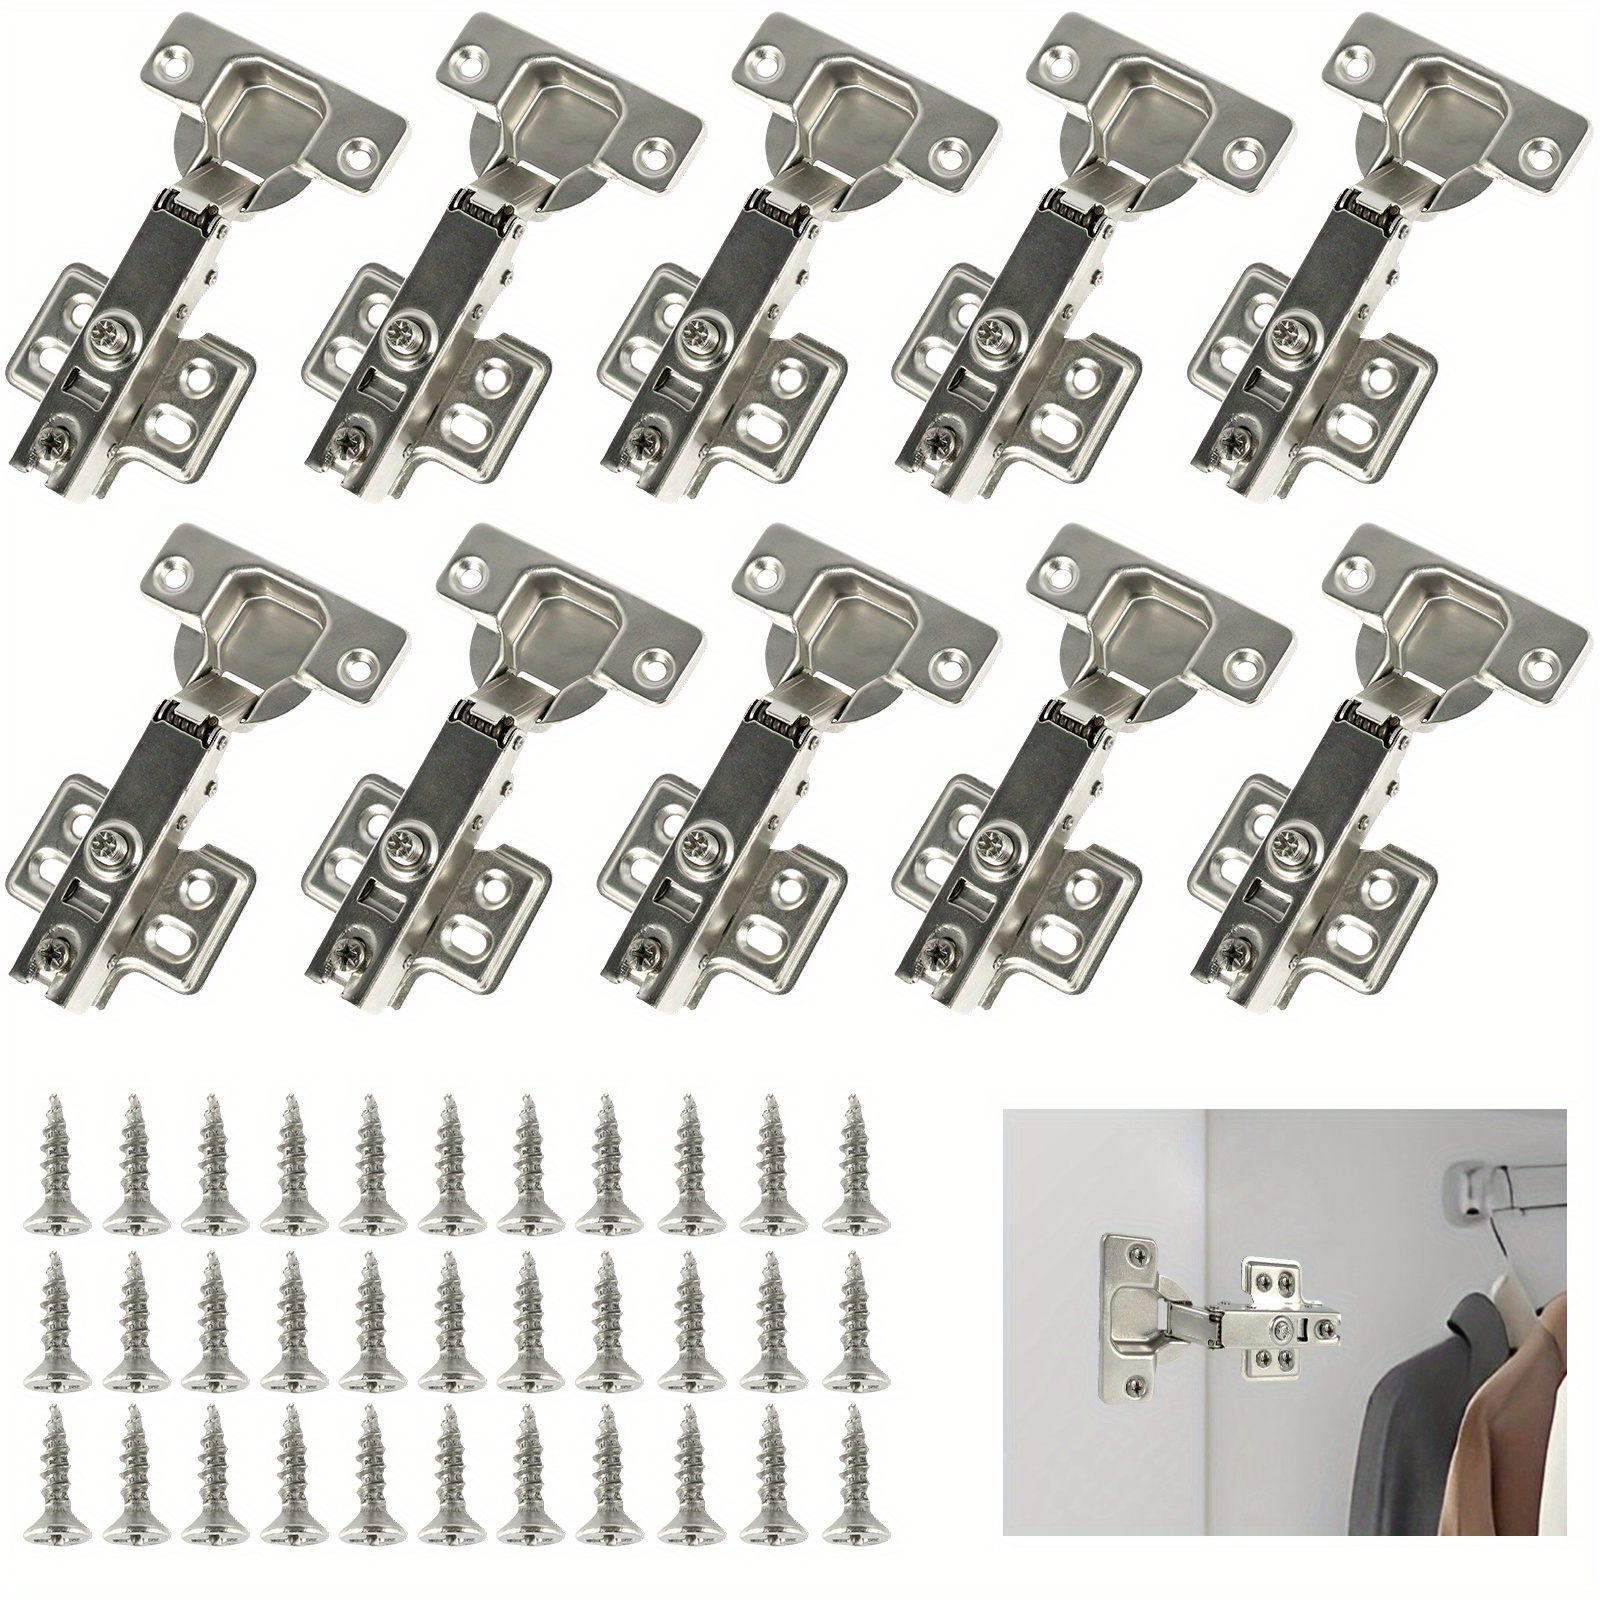 

10pcs Cupboard Hinges Full Overlay Mute Cabinet Door Hinges Set With Screws Cold Rolled Steel Soft Close Hinges 95°-105° Opening Angle For Kitchen Bathroom Cabinet Doors